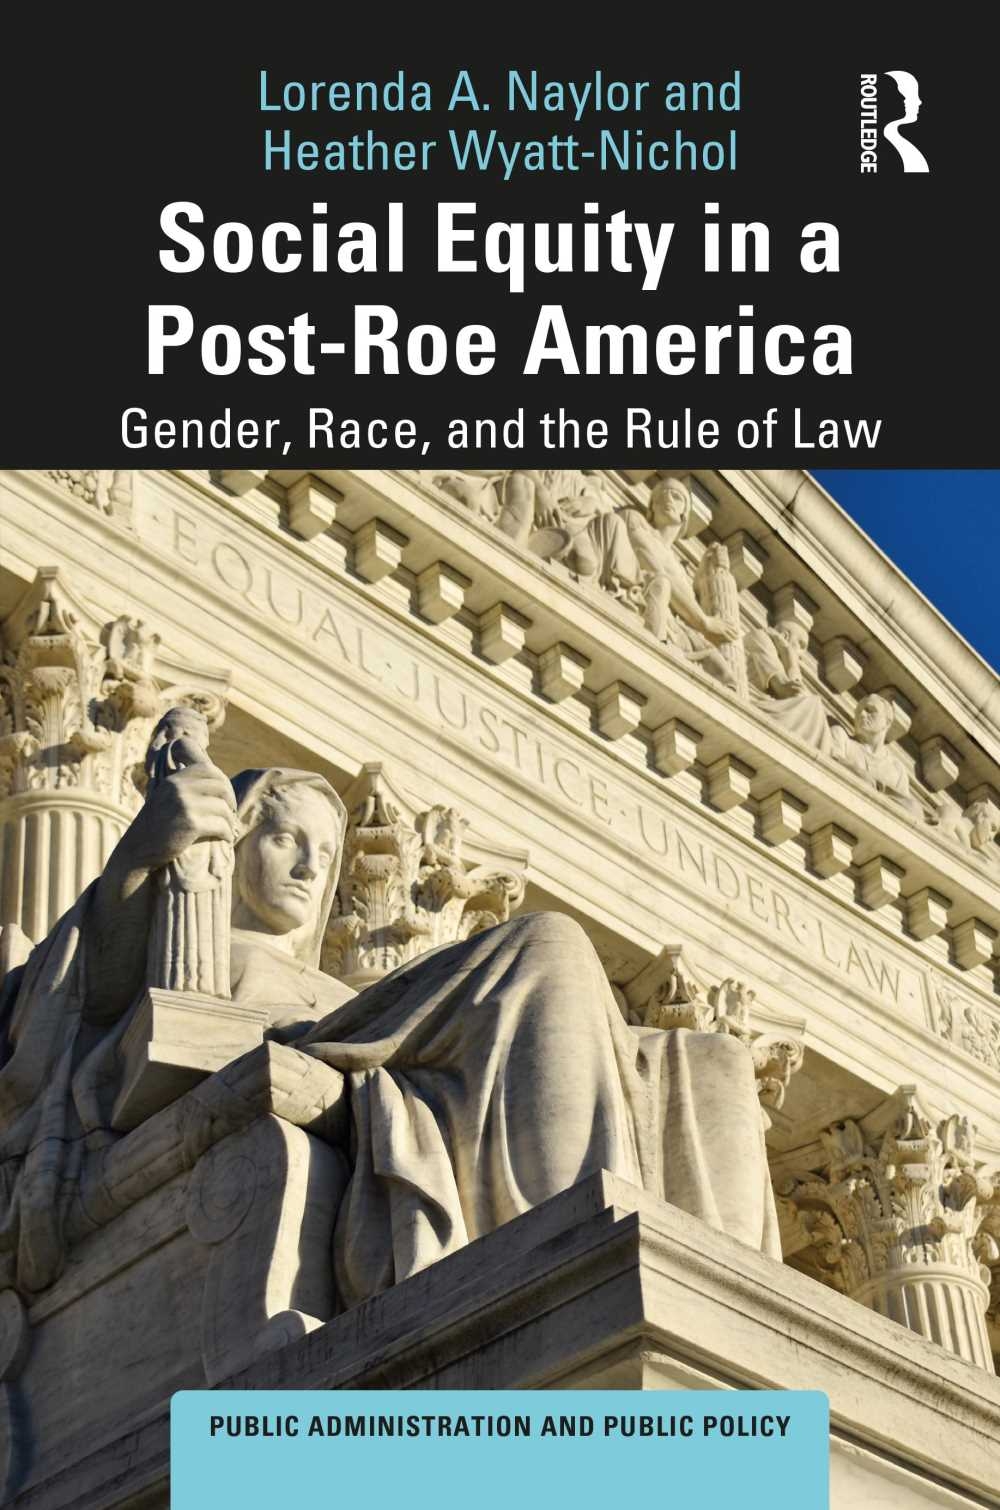 Social Equity in a Post-Roe America: Gender, Race, and the Rule of Law